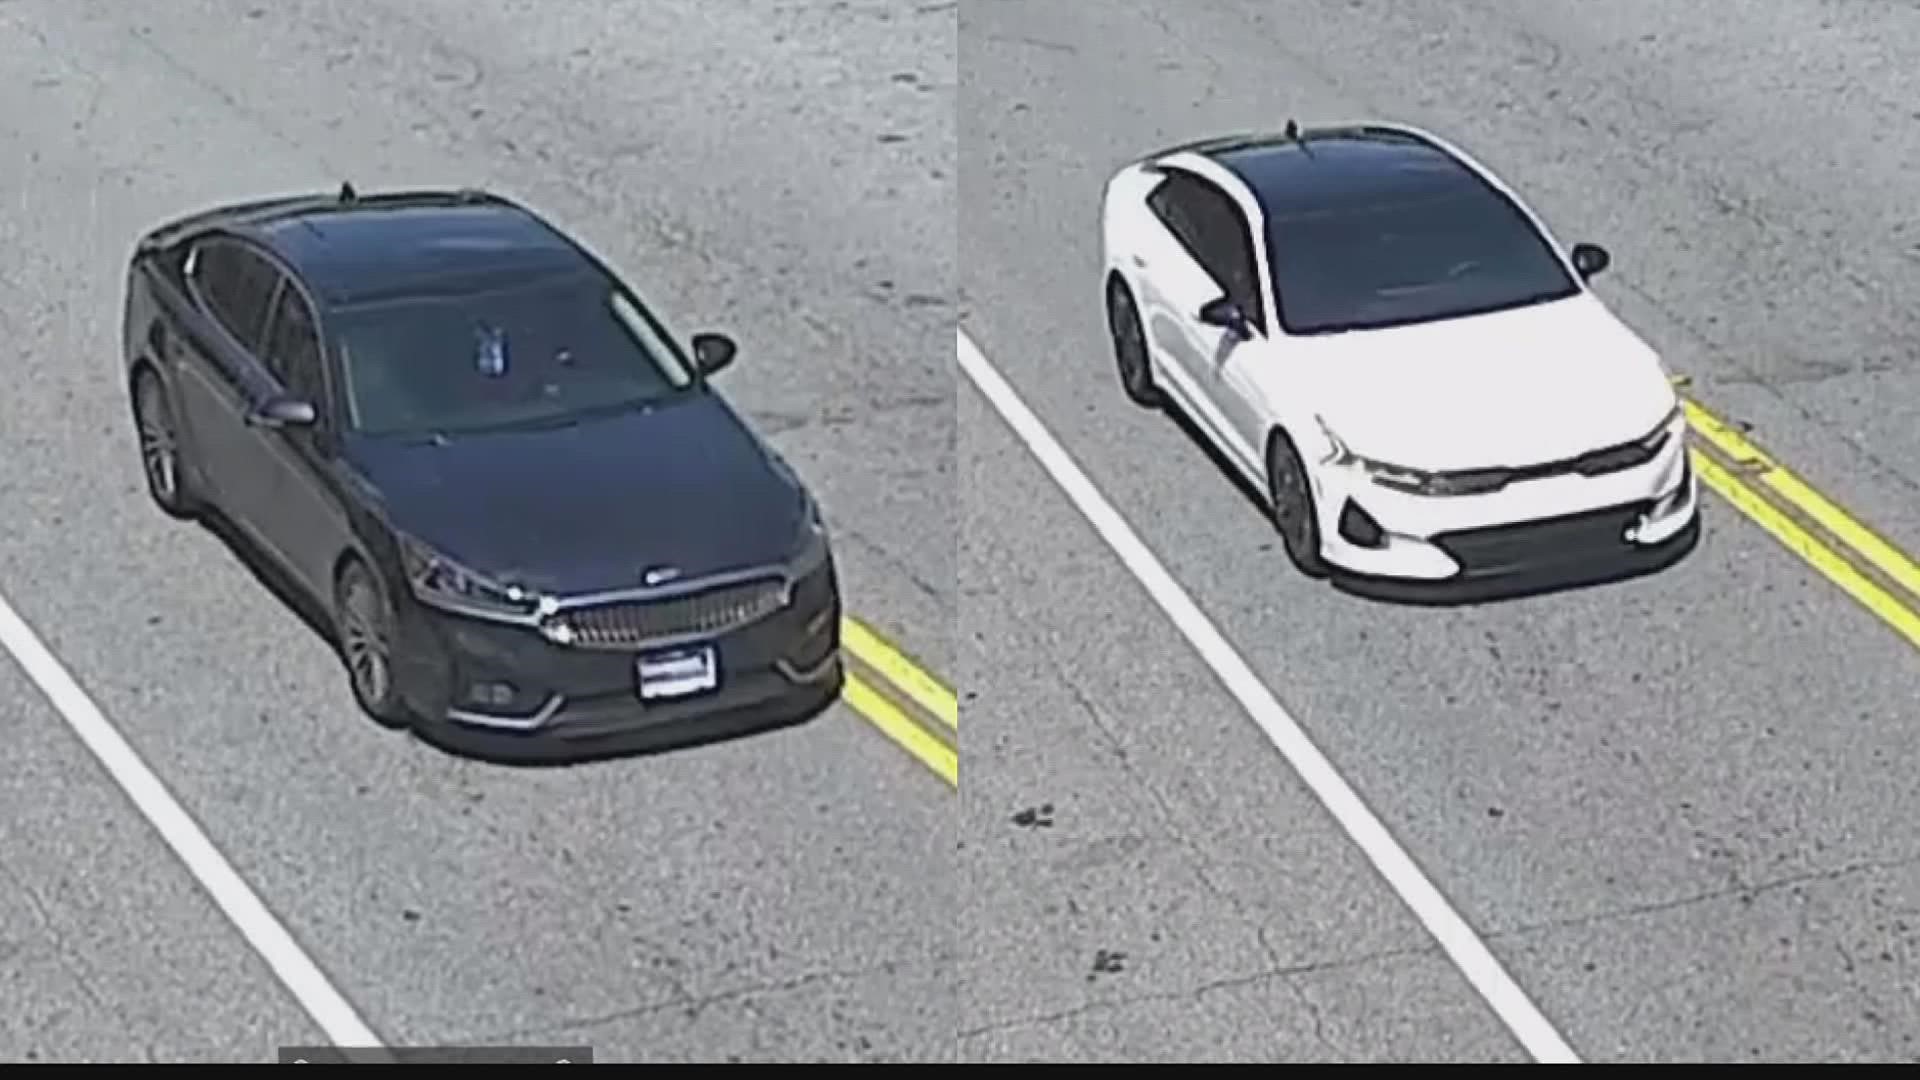 Atlanta Police want to find who was driving the cars, as they believe they were the cars that opened fire on another car, striking a toddler in the head.